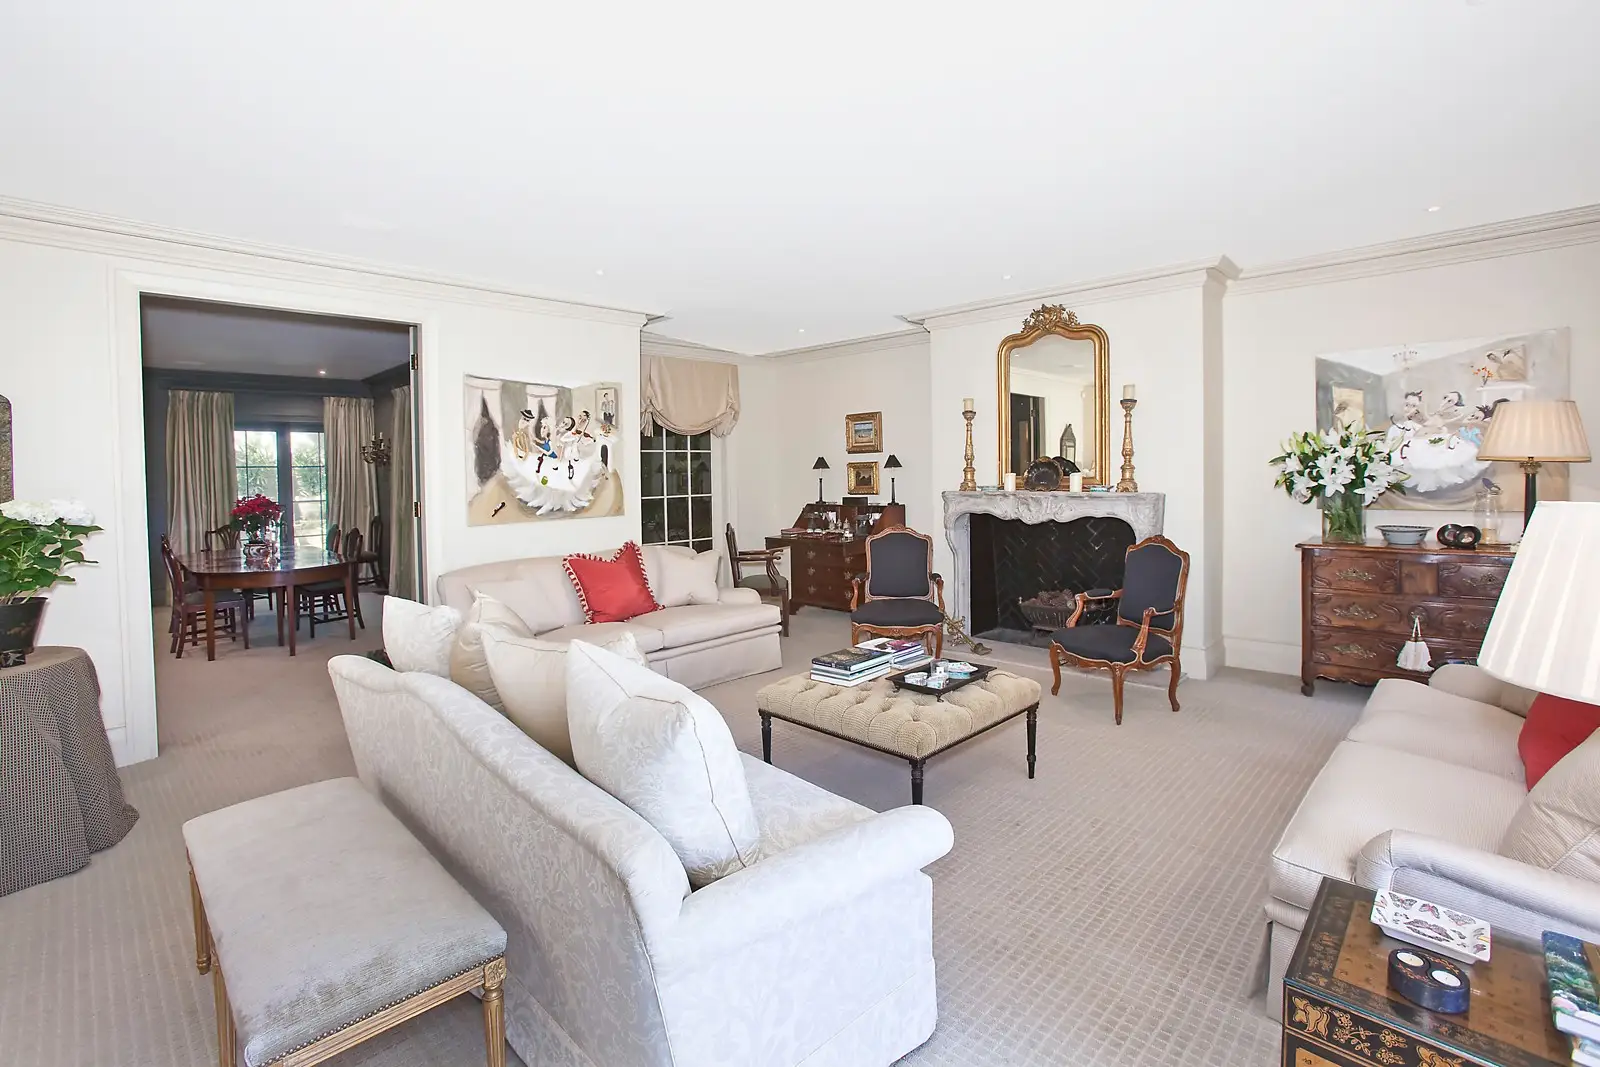 Photo #2: 2 Carrington Avenue, Bellevue Hill - Sold by Sydney Sotheby's International Realty